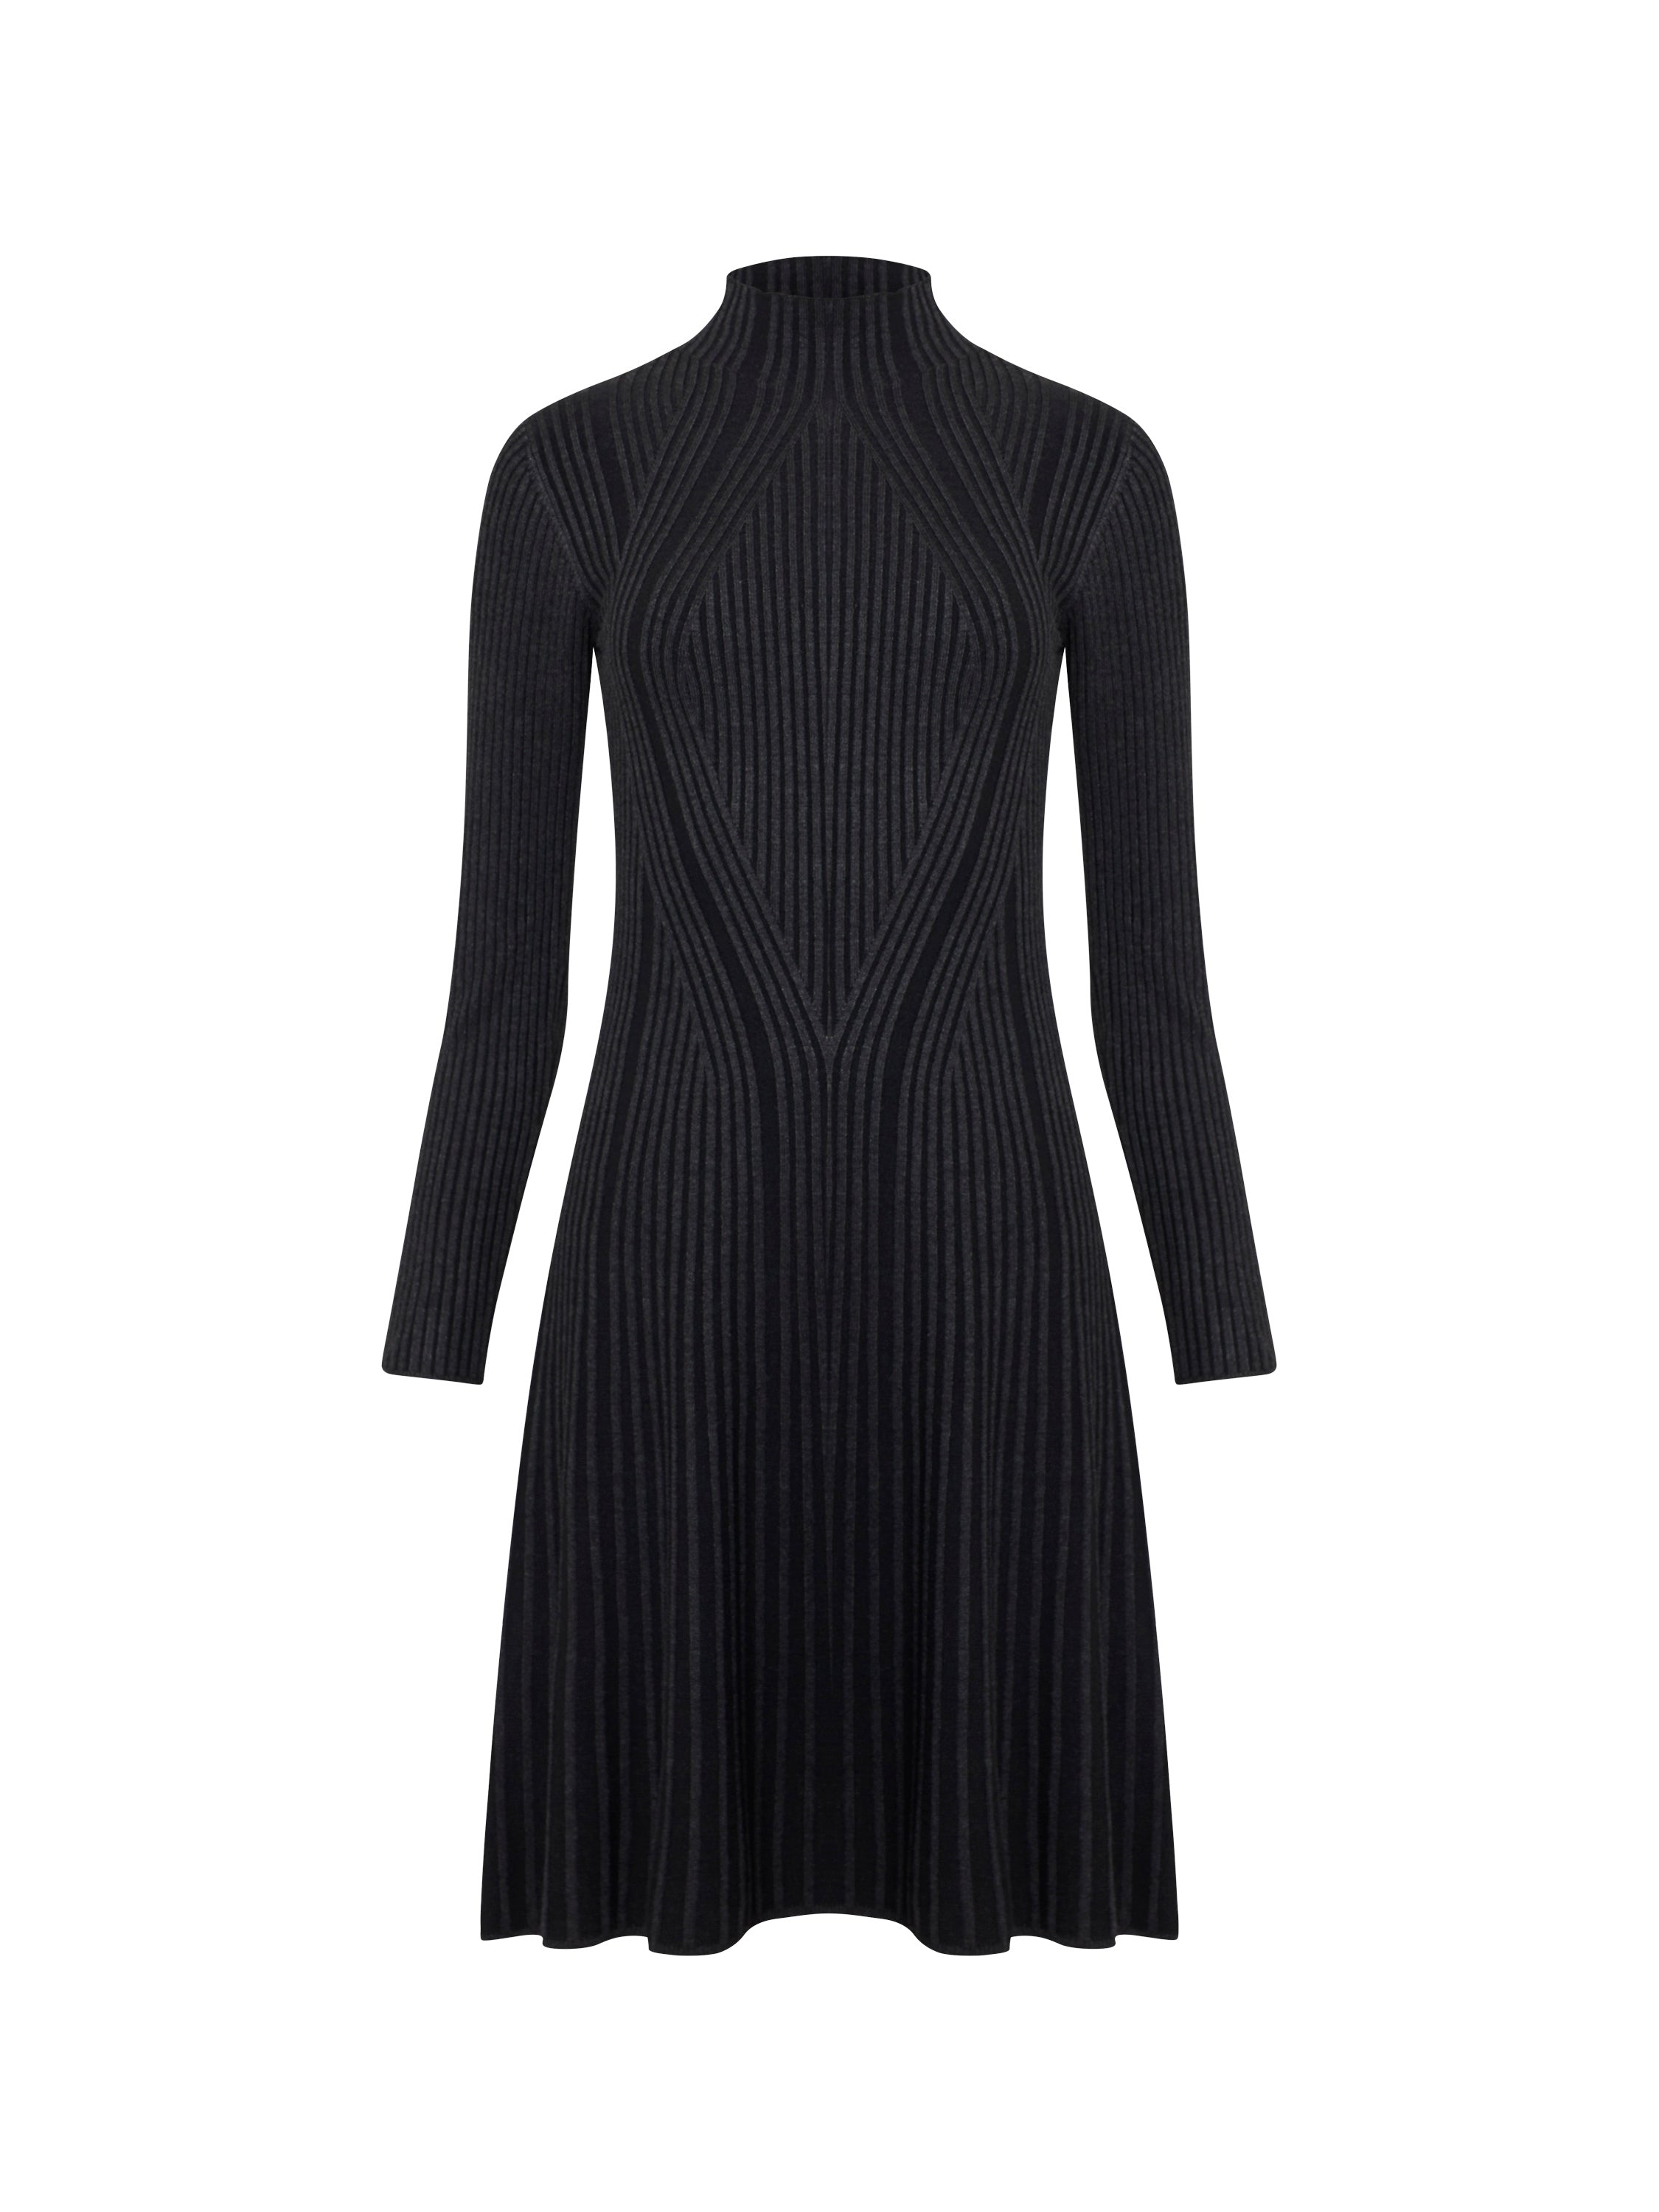 Mari Rib Above The Knee Dress Charcoal Mel/ Black | French Connection US